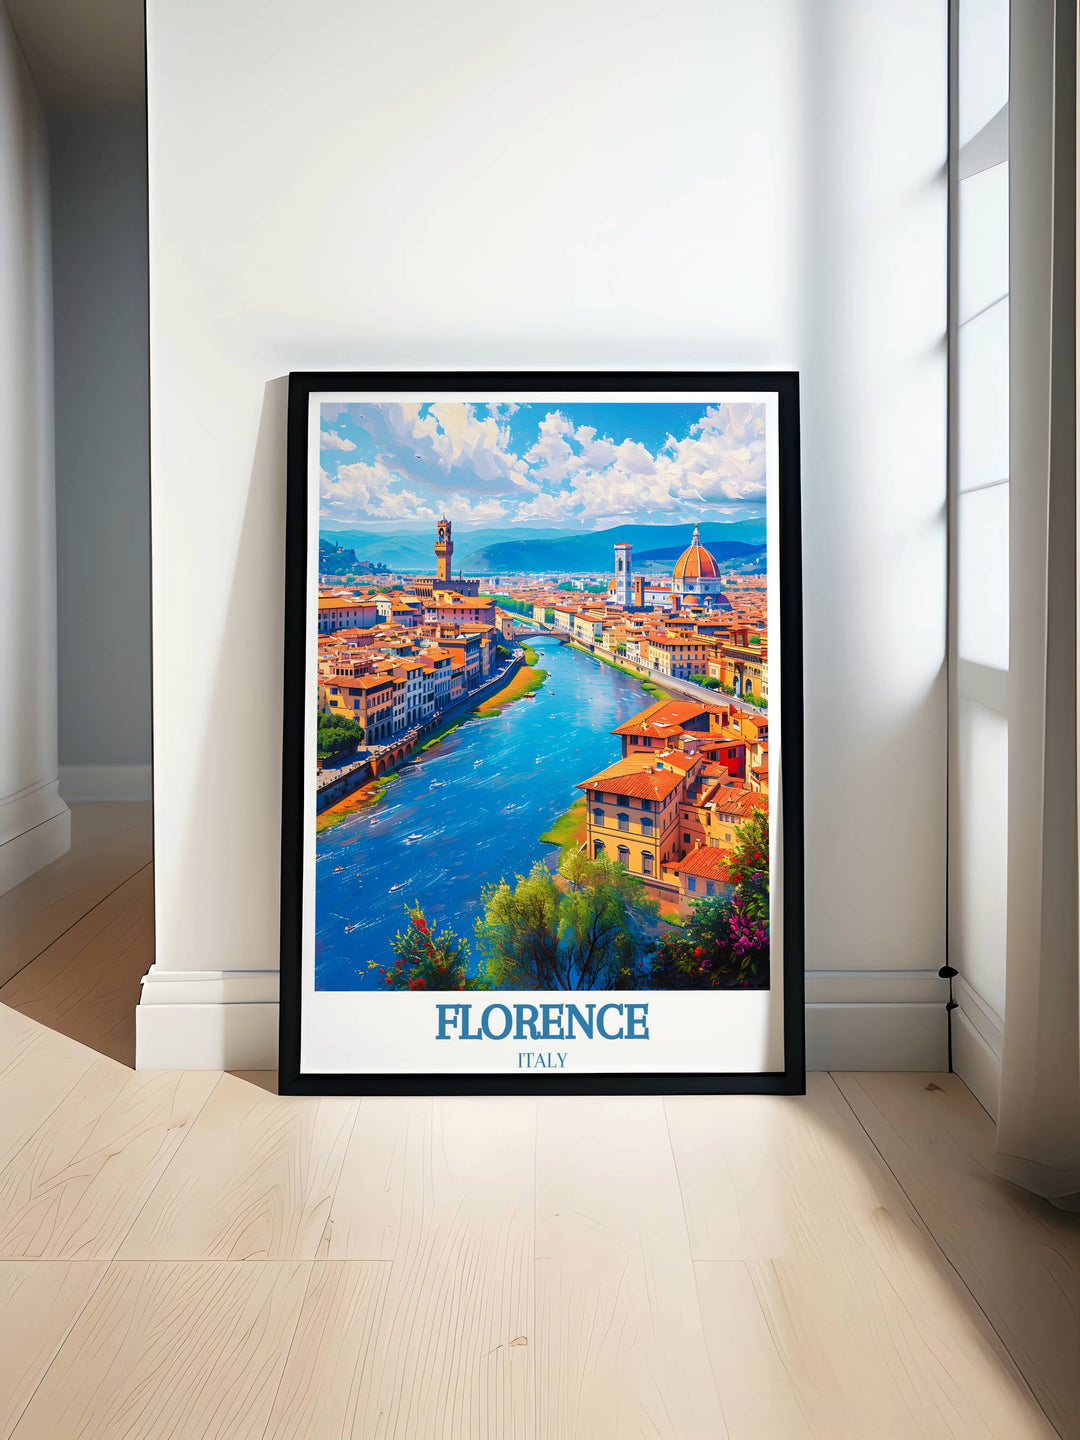 Captivating Wall Print depicting the Uffizi Gallery, a tribute to the legacy of art and culture it represents in the heart of Florence, Italy